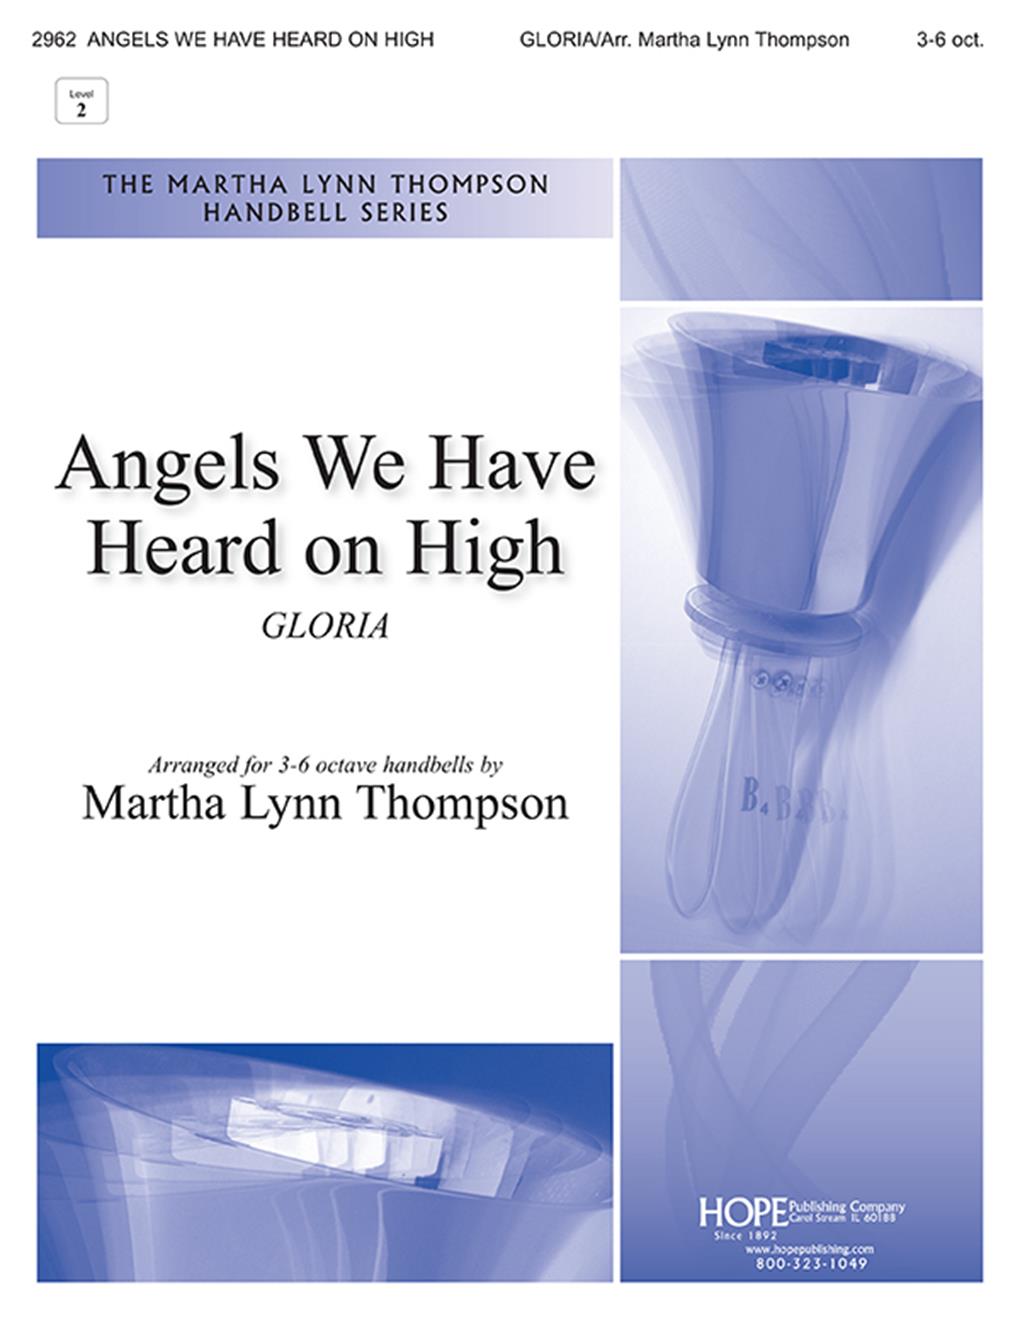 ANGELS WE HAVE HEARD ON HIGH - 3-6 Oct. Cover Image